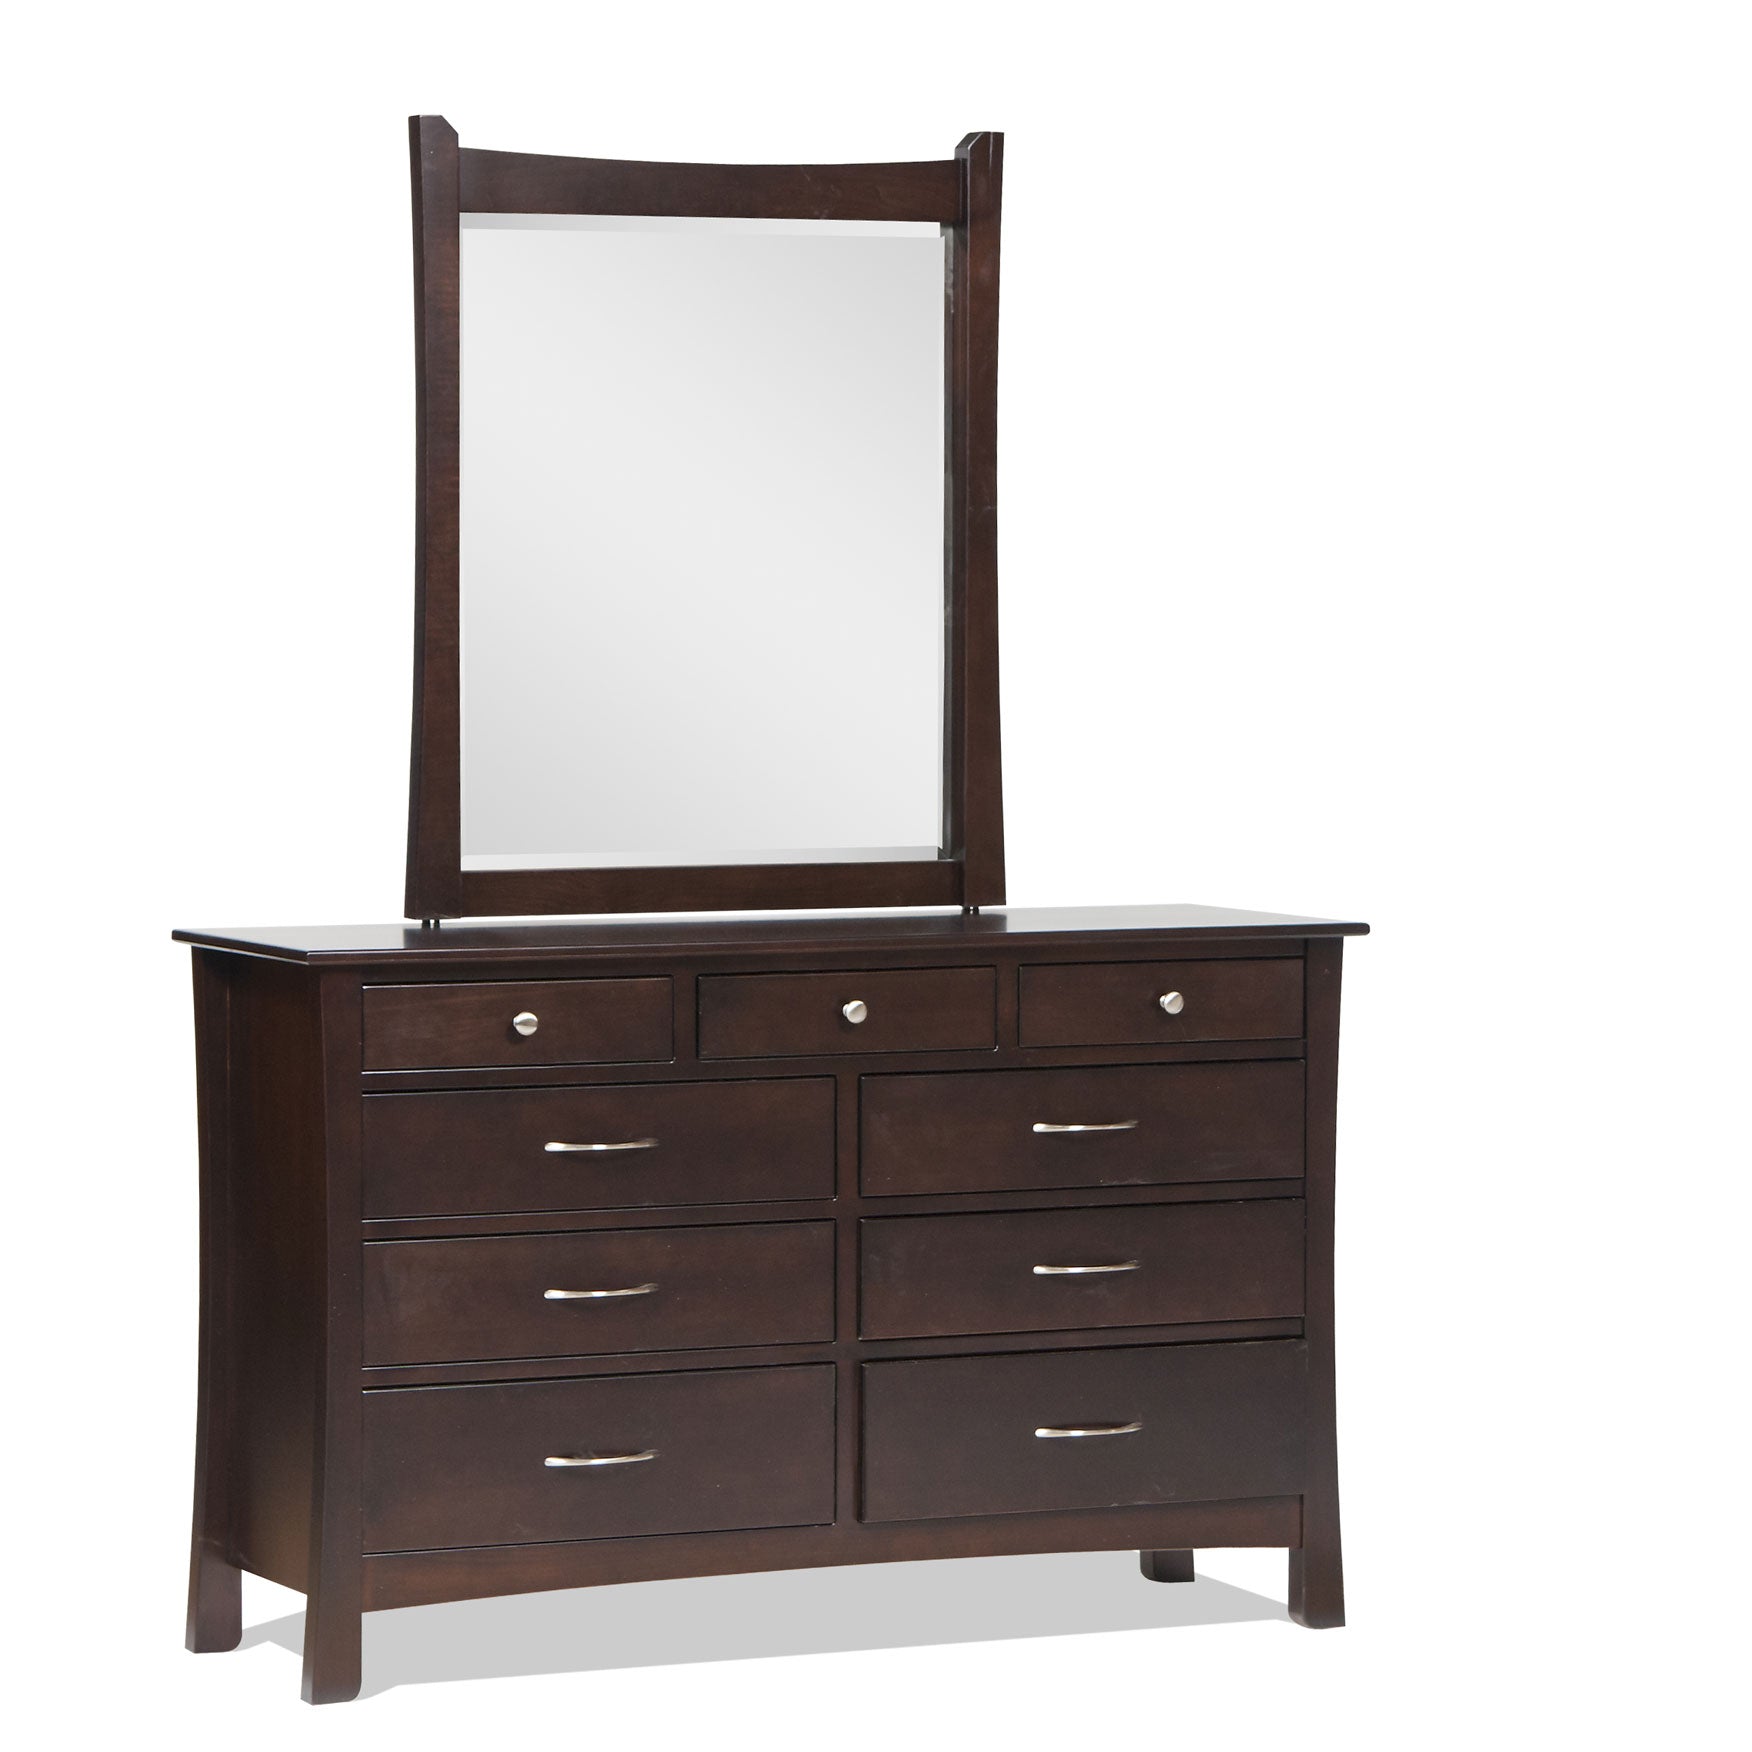 New Transitions Double Dresser - snyders.furniture